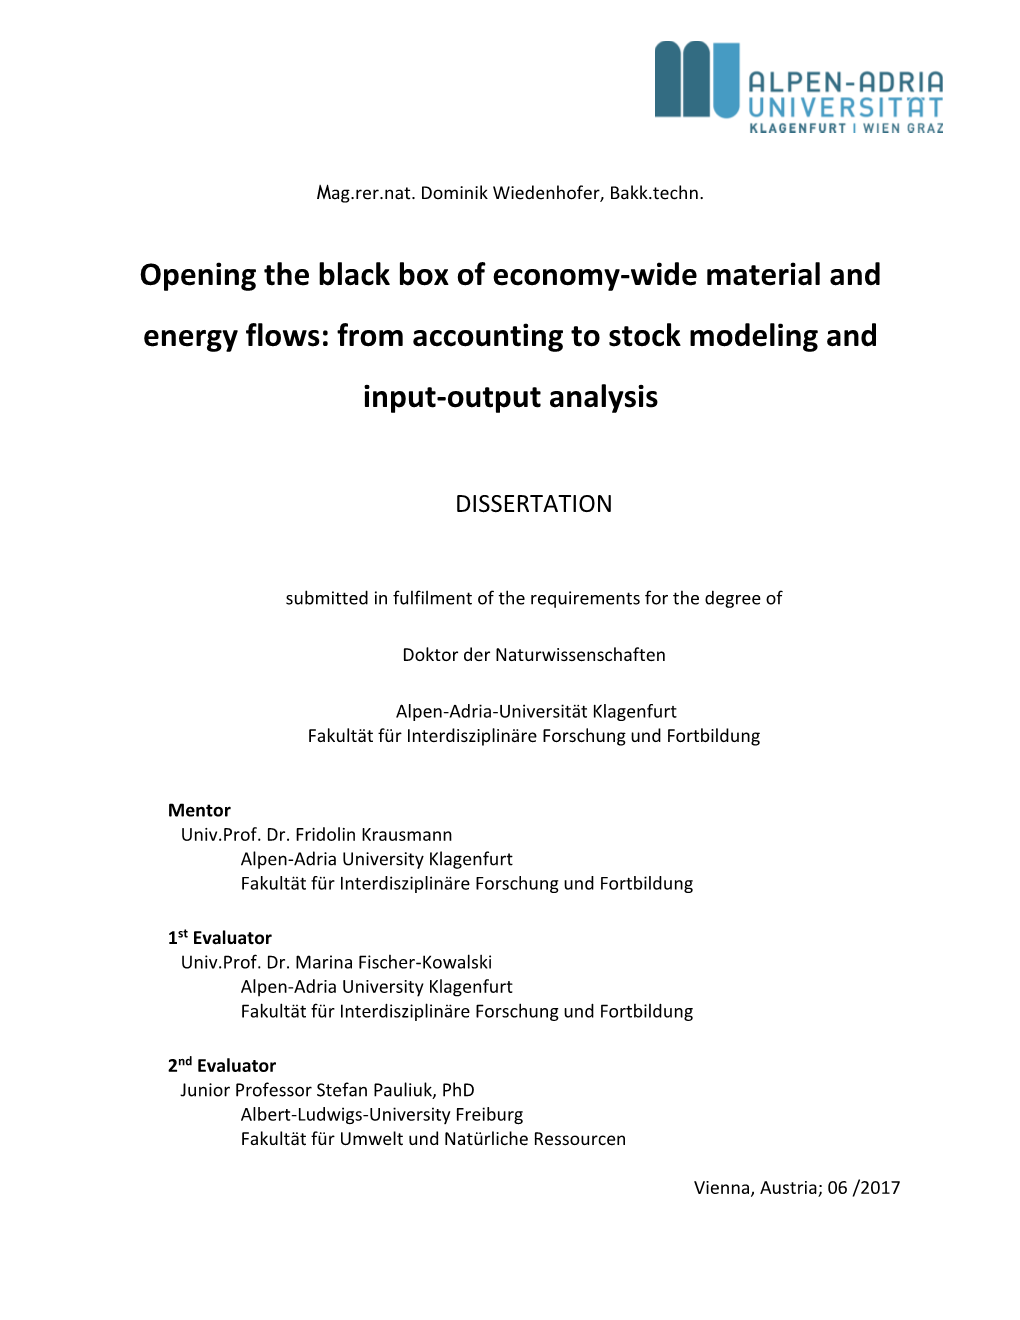 Opening the Black Box of Economy-Wide Material and Energy Flows: from Accounting to Stock Modeling and Input-Output Analysis